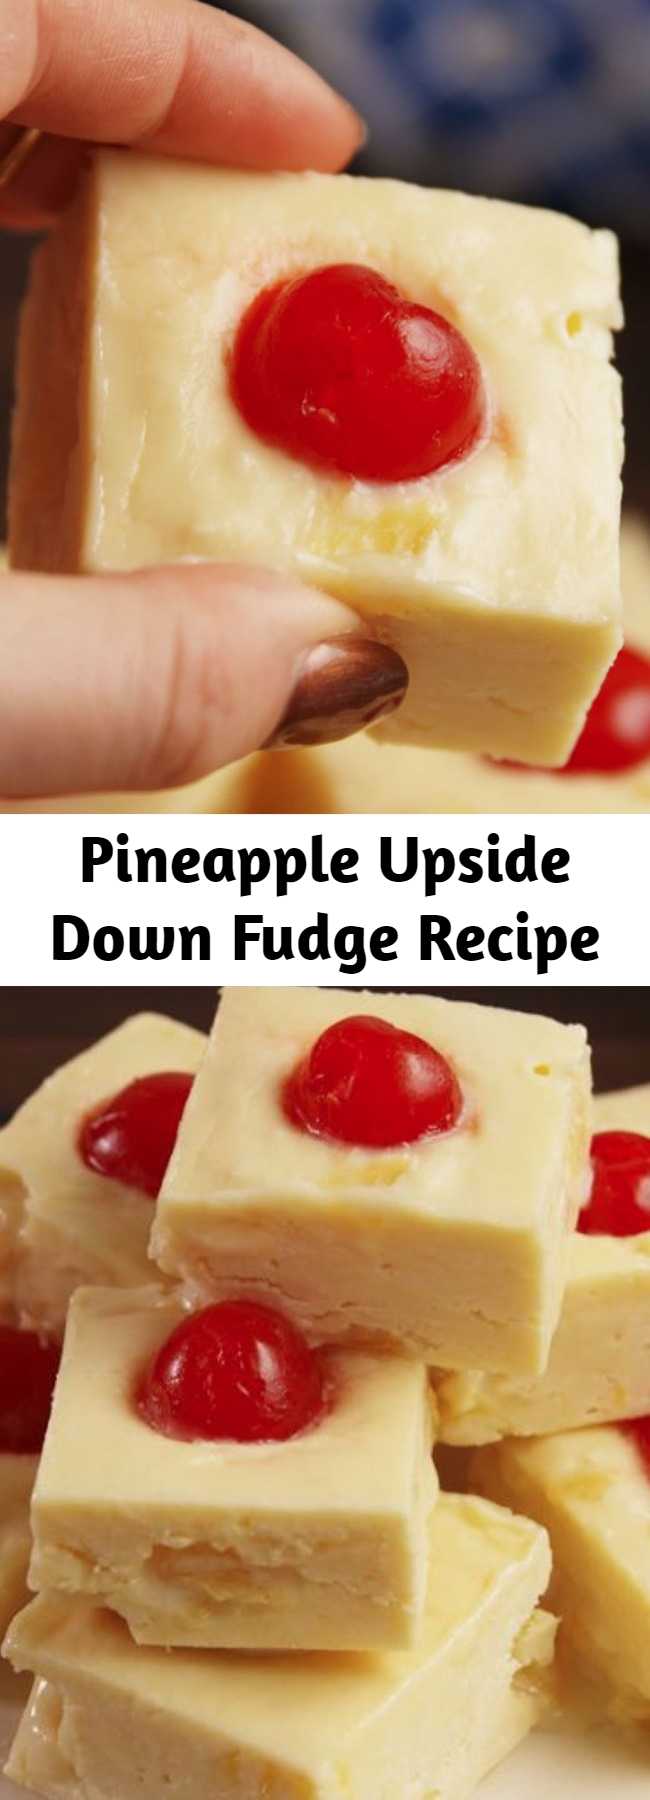 Pineapple Upside Down Fudge Recipe - A classic cake is turned into fudge. We're FLIPPING out over how good this Pineapple Upside-Down Fudge is. #recipe #fudge #easyrecipes #pineapple #whitechocolate #dessert #cherry